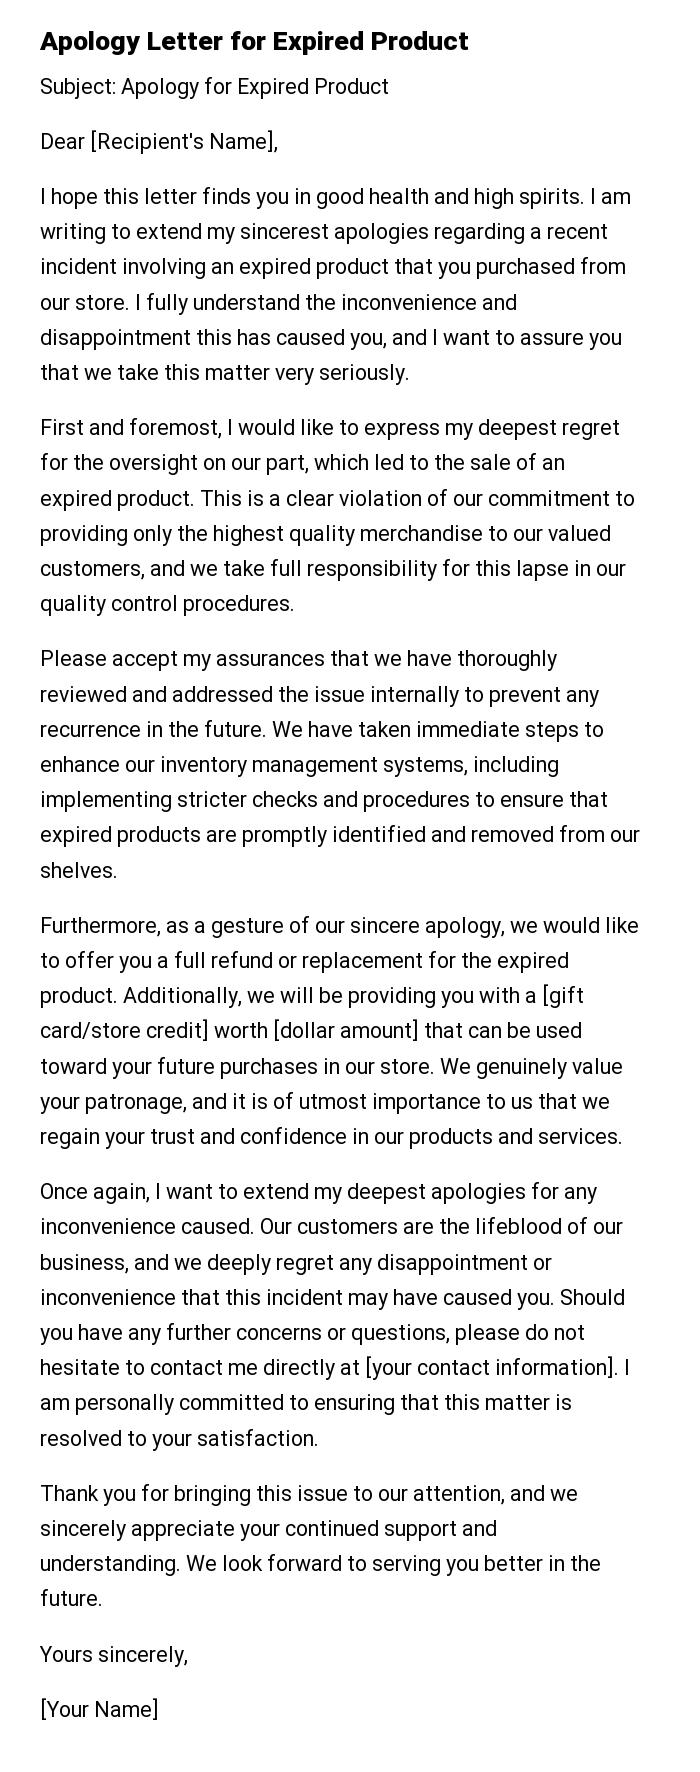 Apology Letter for Expired Product